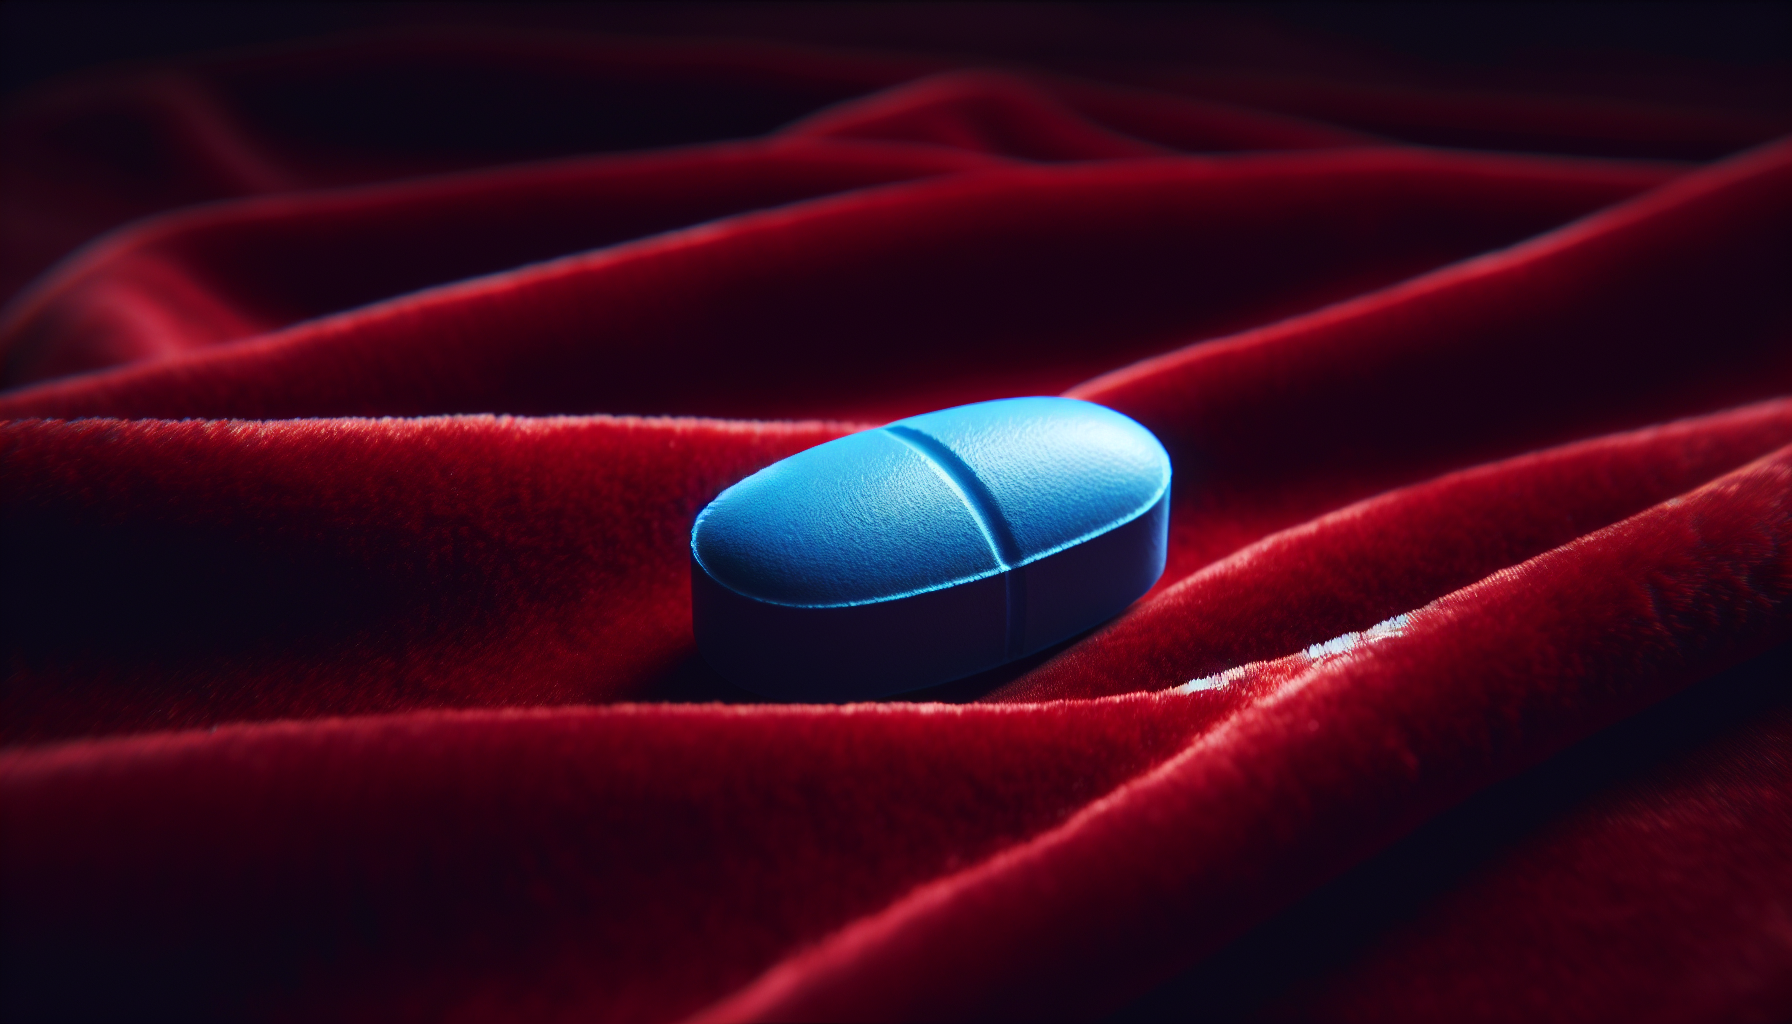 What Happens When You Come After Taking Viagra?